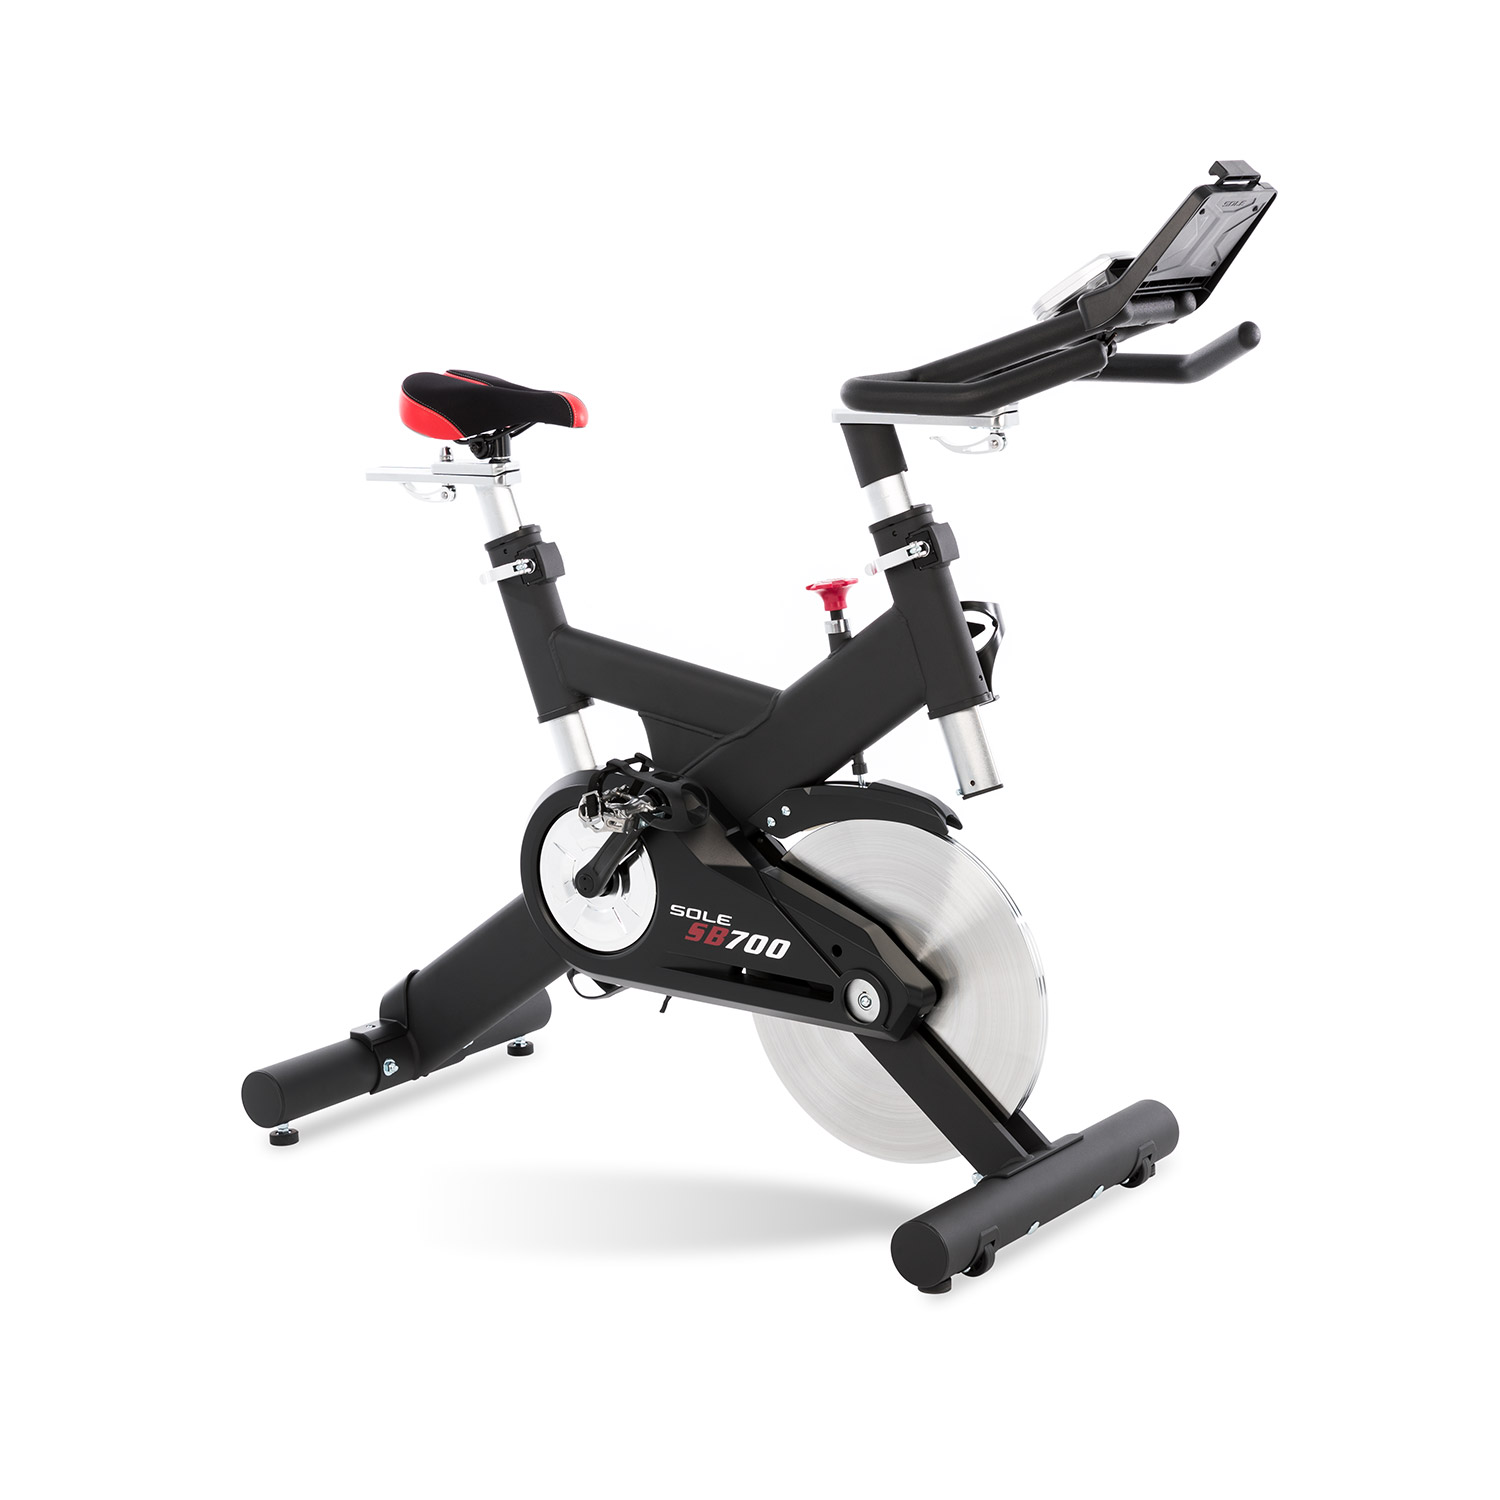 Sports Equipment & Accessories NEW SB700 Indoor Cycle